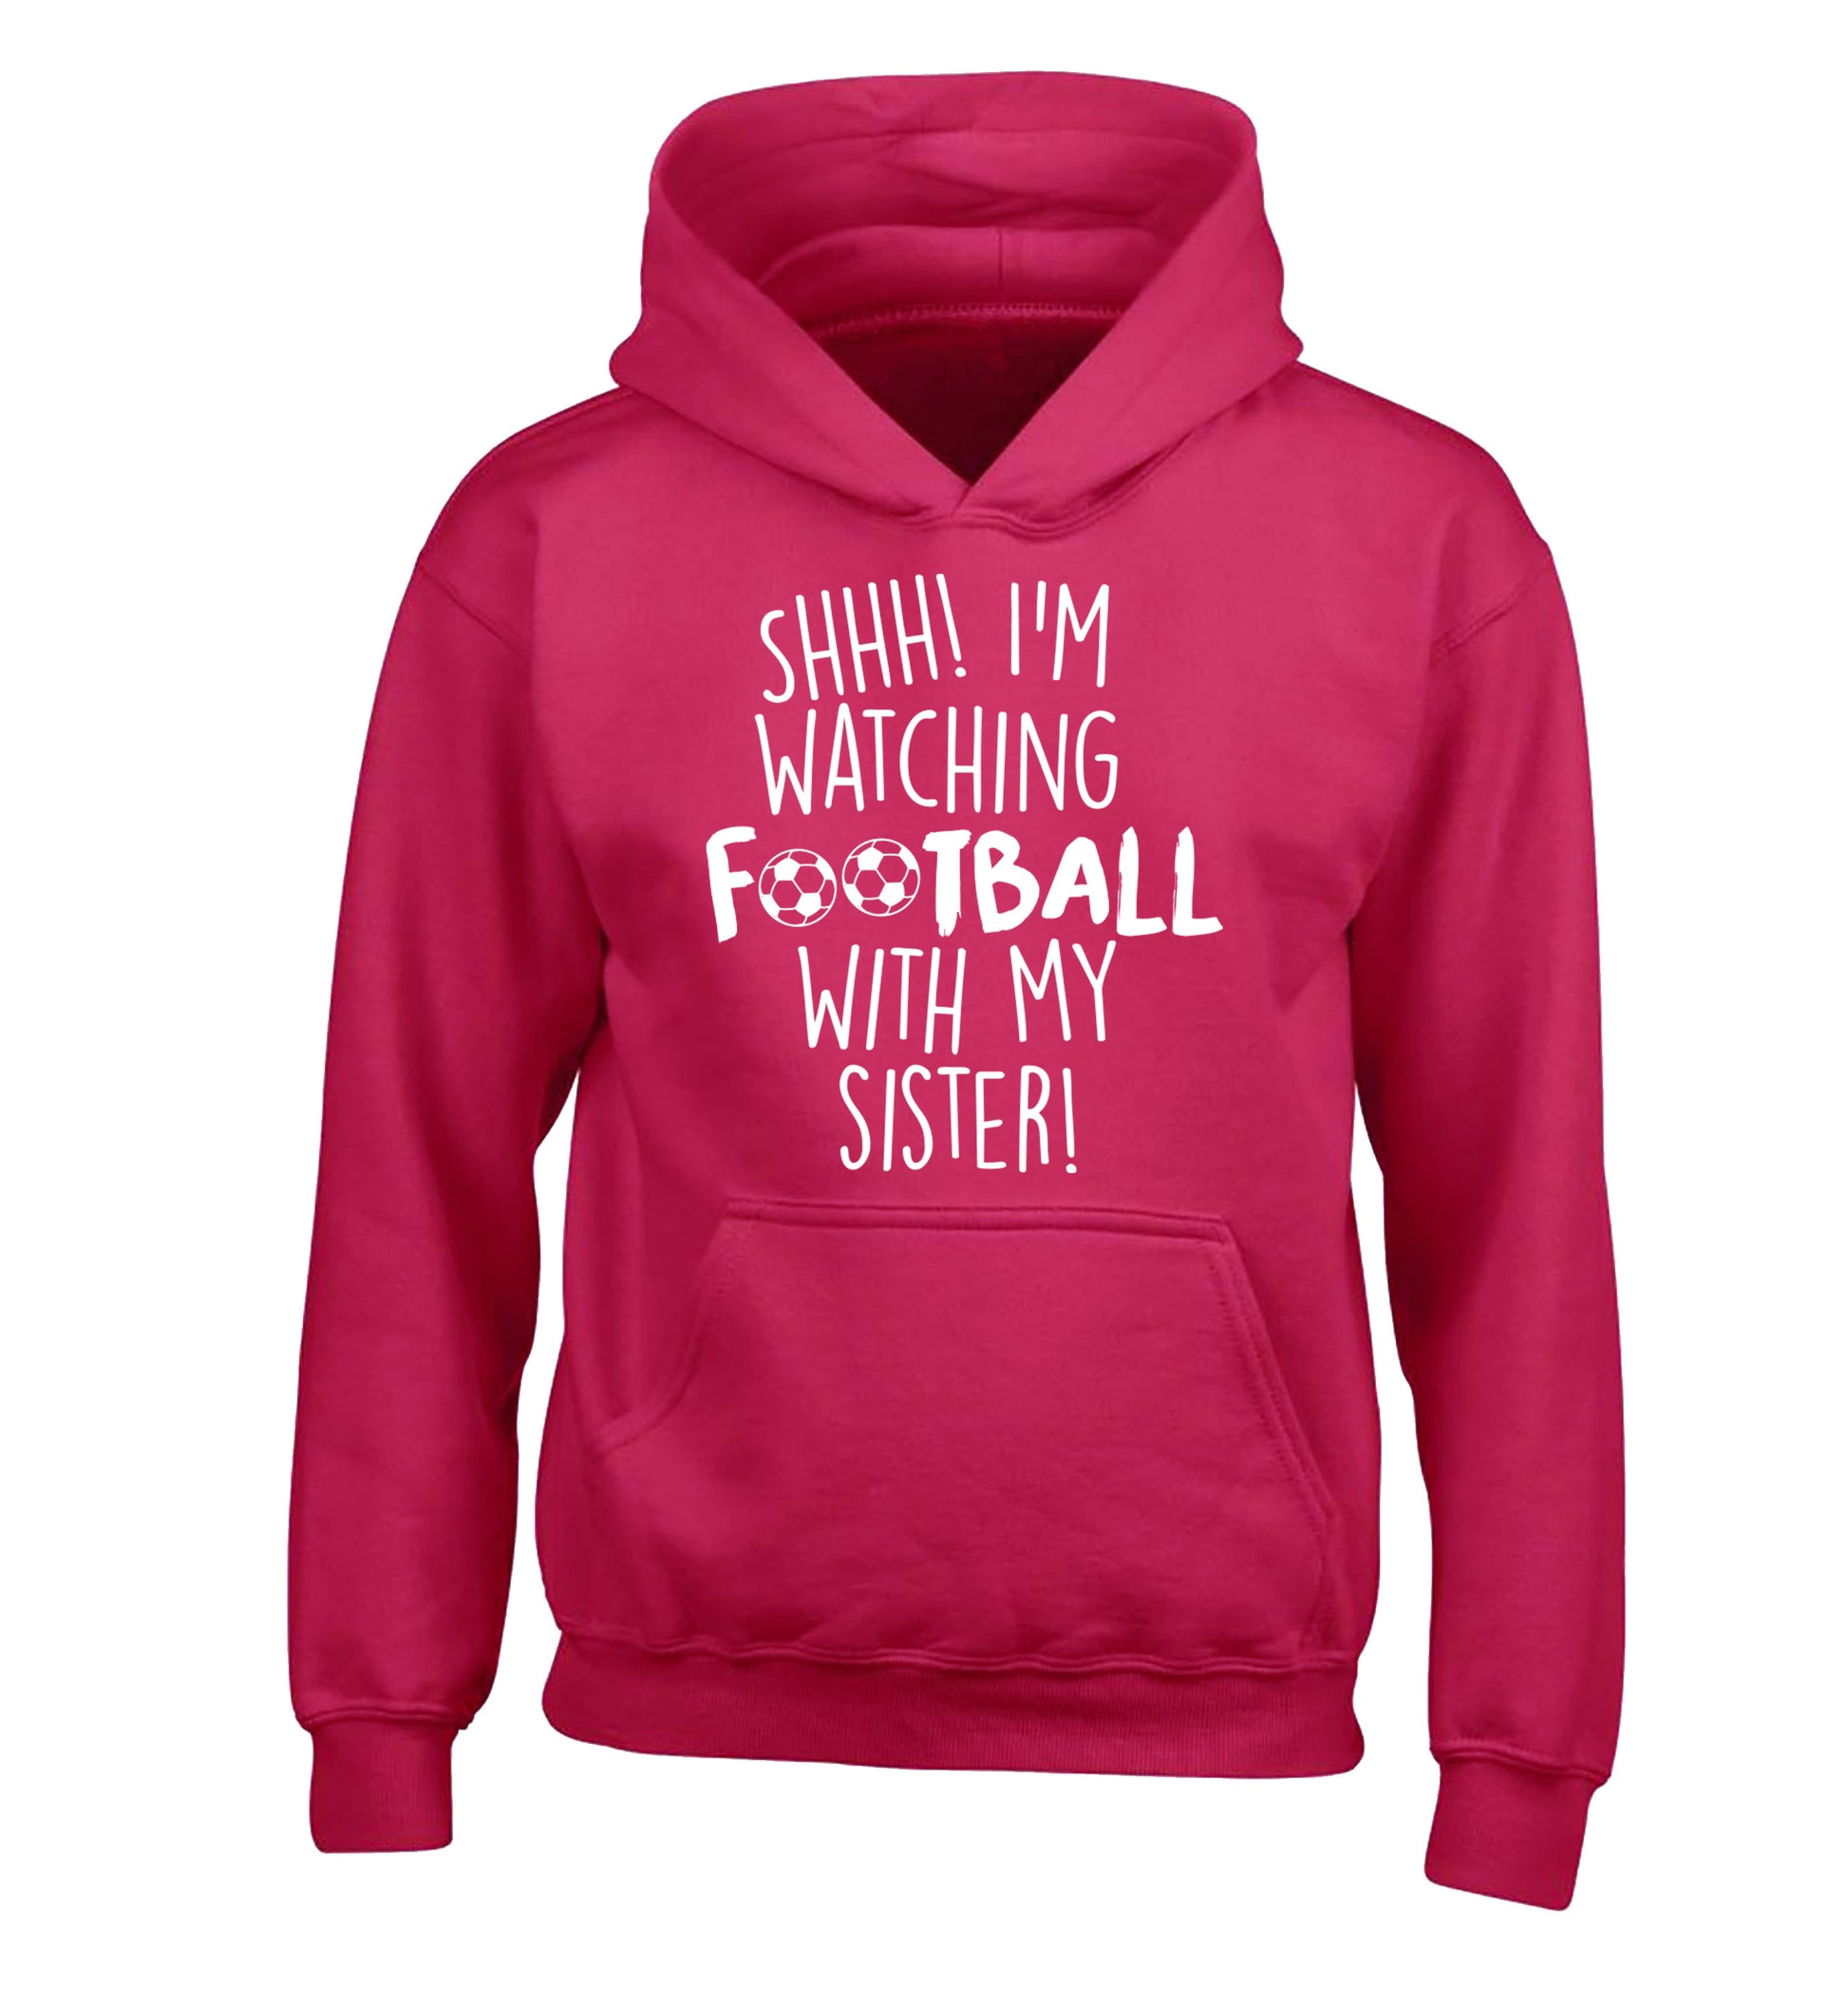 Shhh I'm watching football with my sister children's pink hoodie 12-14 Years